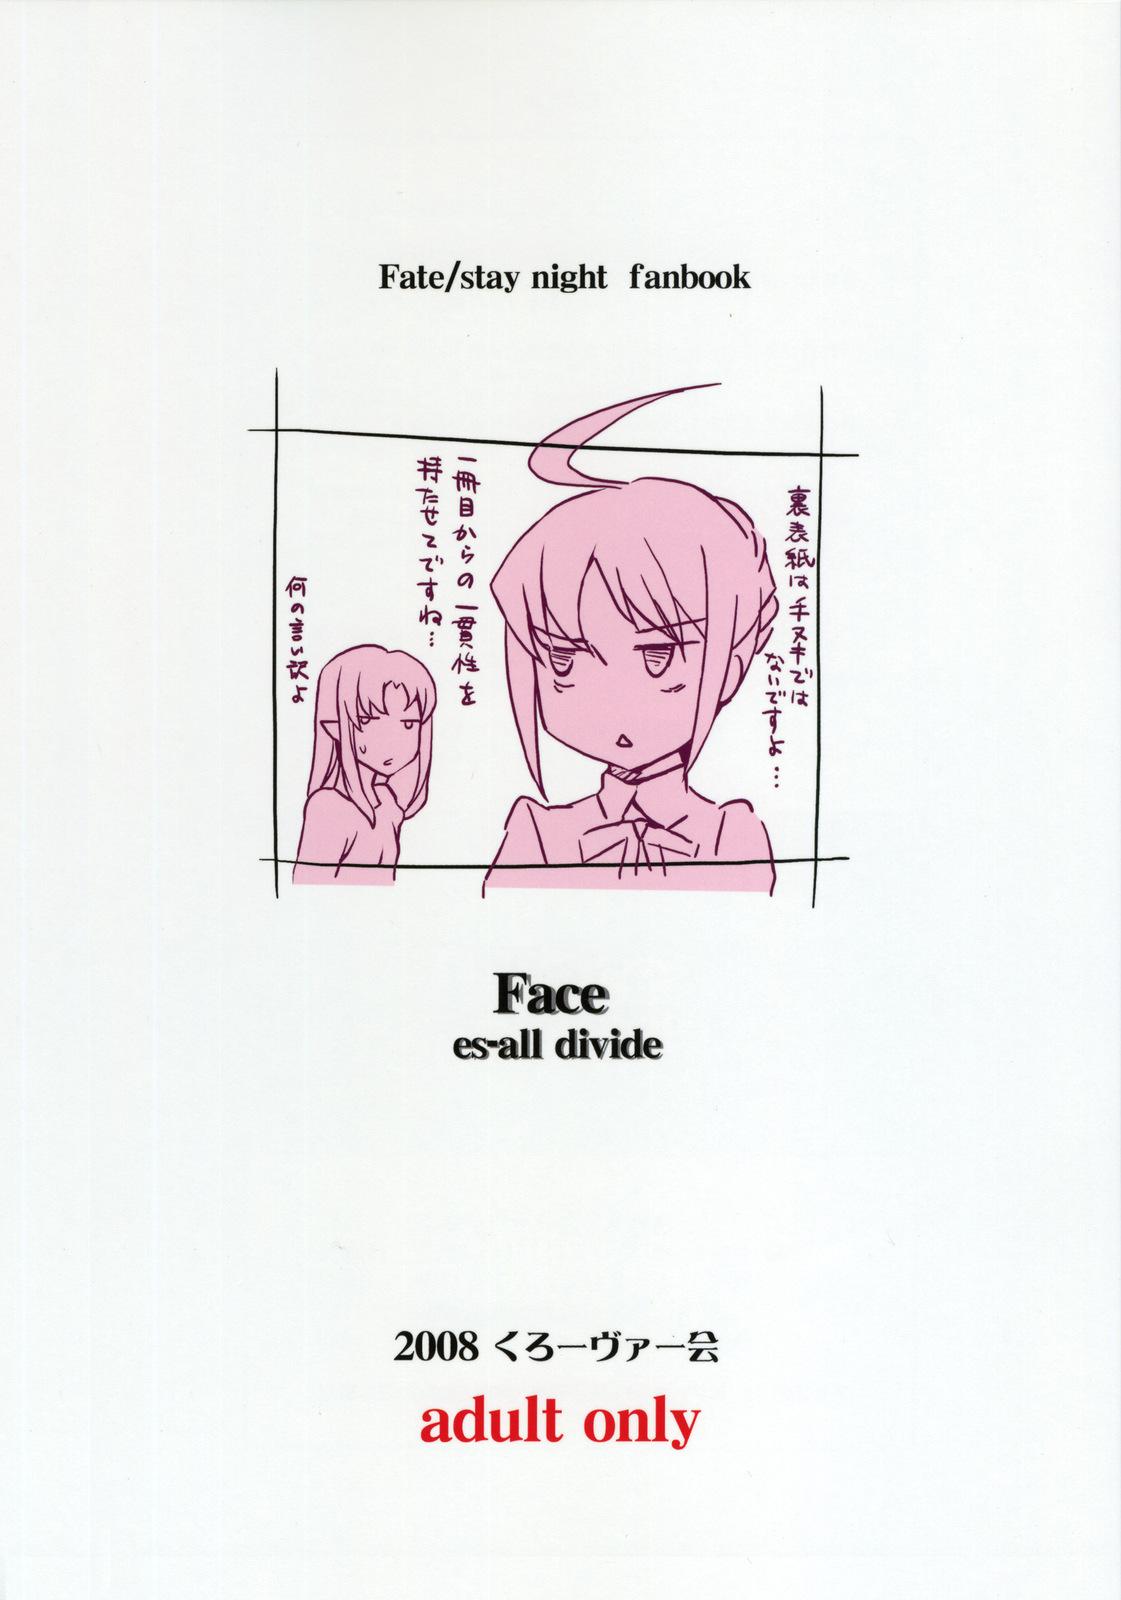 Club Face es-all divide - Fate stay night Tgirl - Page 144